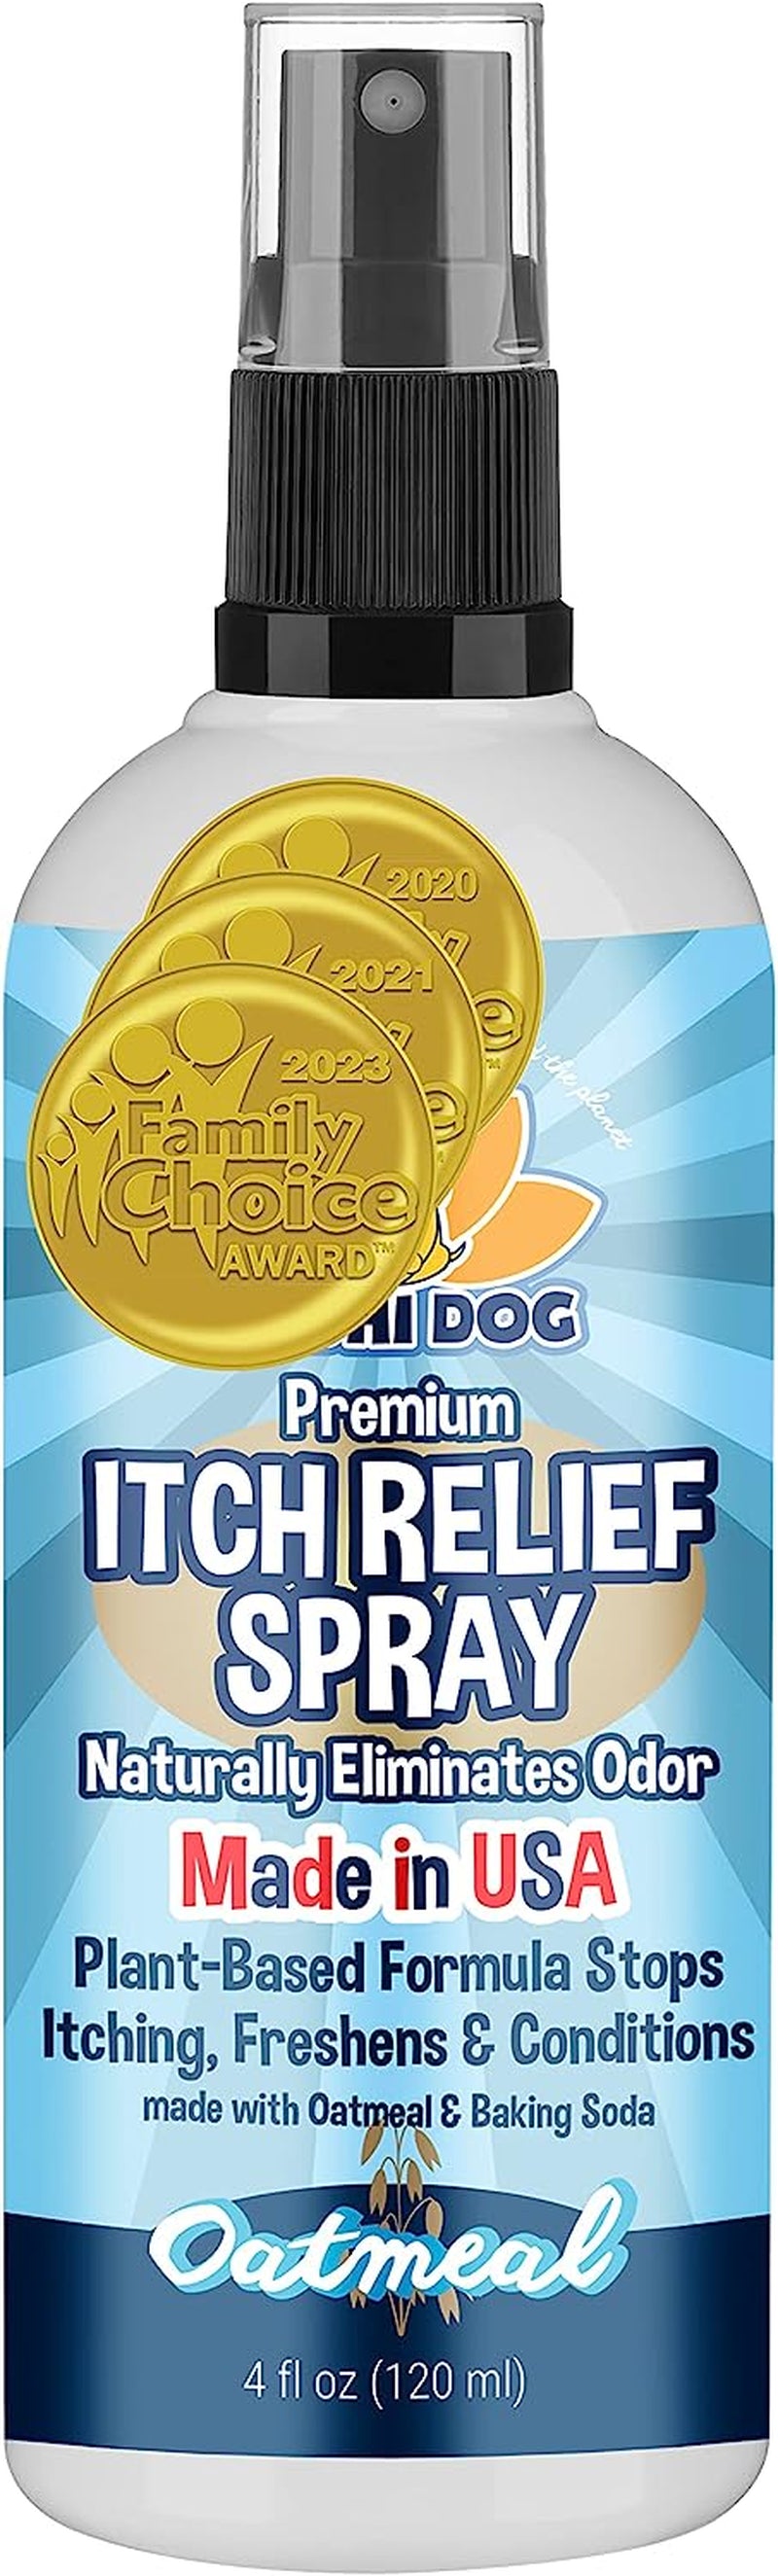 Anti Itch Oatmeal Spray for Dogs and Cats | 100% Natural Soothing Relief for Dry, Itchy, Bitten or Allergy Damaged Skin Treatment | Professional Quality